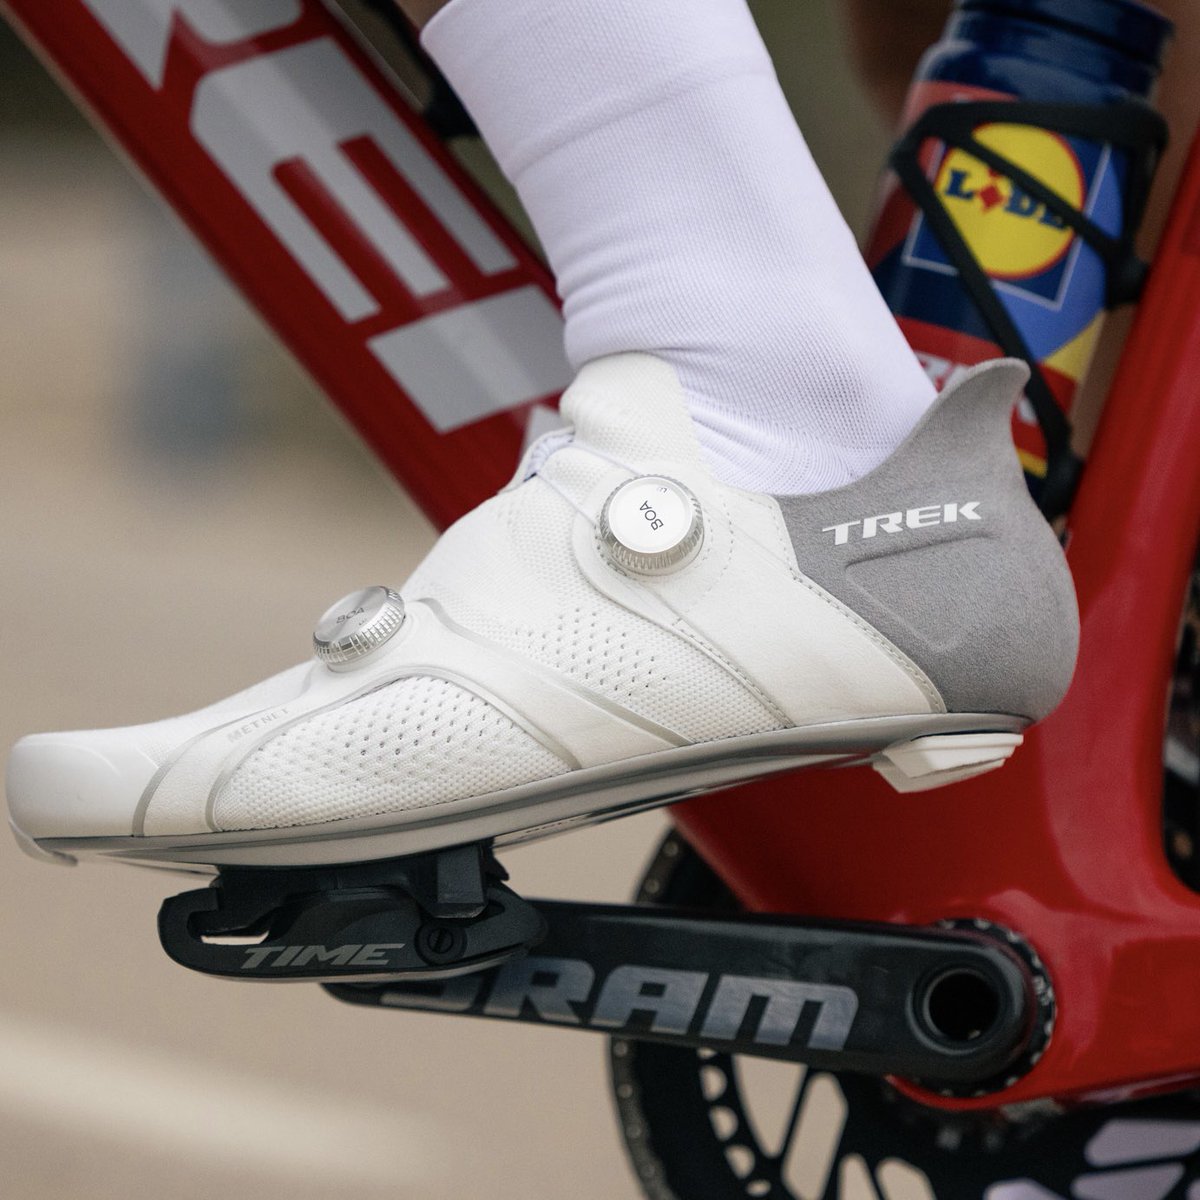 Space-age 👽 kicks have been spotted on the feet of Lidl-Trek riders 👀 Say hello to the all-new @TrekBikes RSL Knit and RSL Road shoes 🤤 🛒 trekbikes.com/trek-metnet-sh…